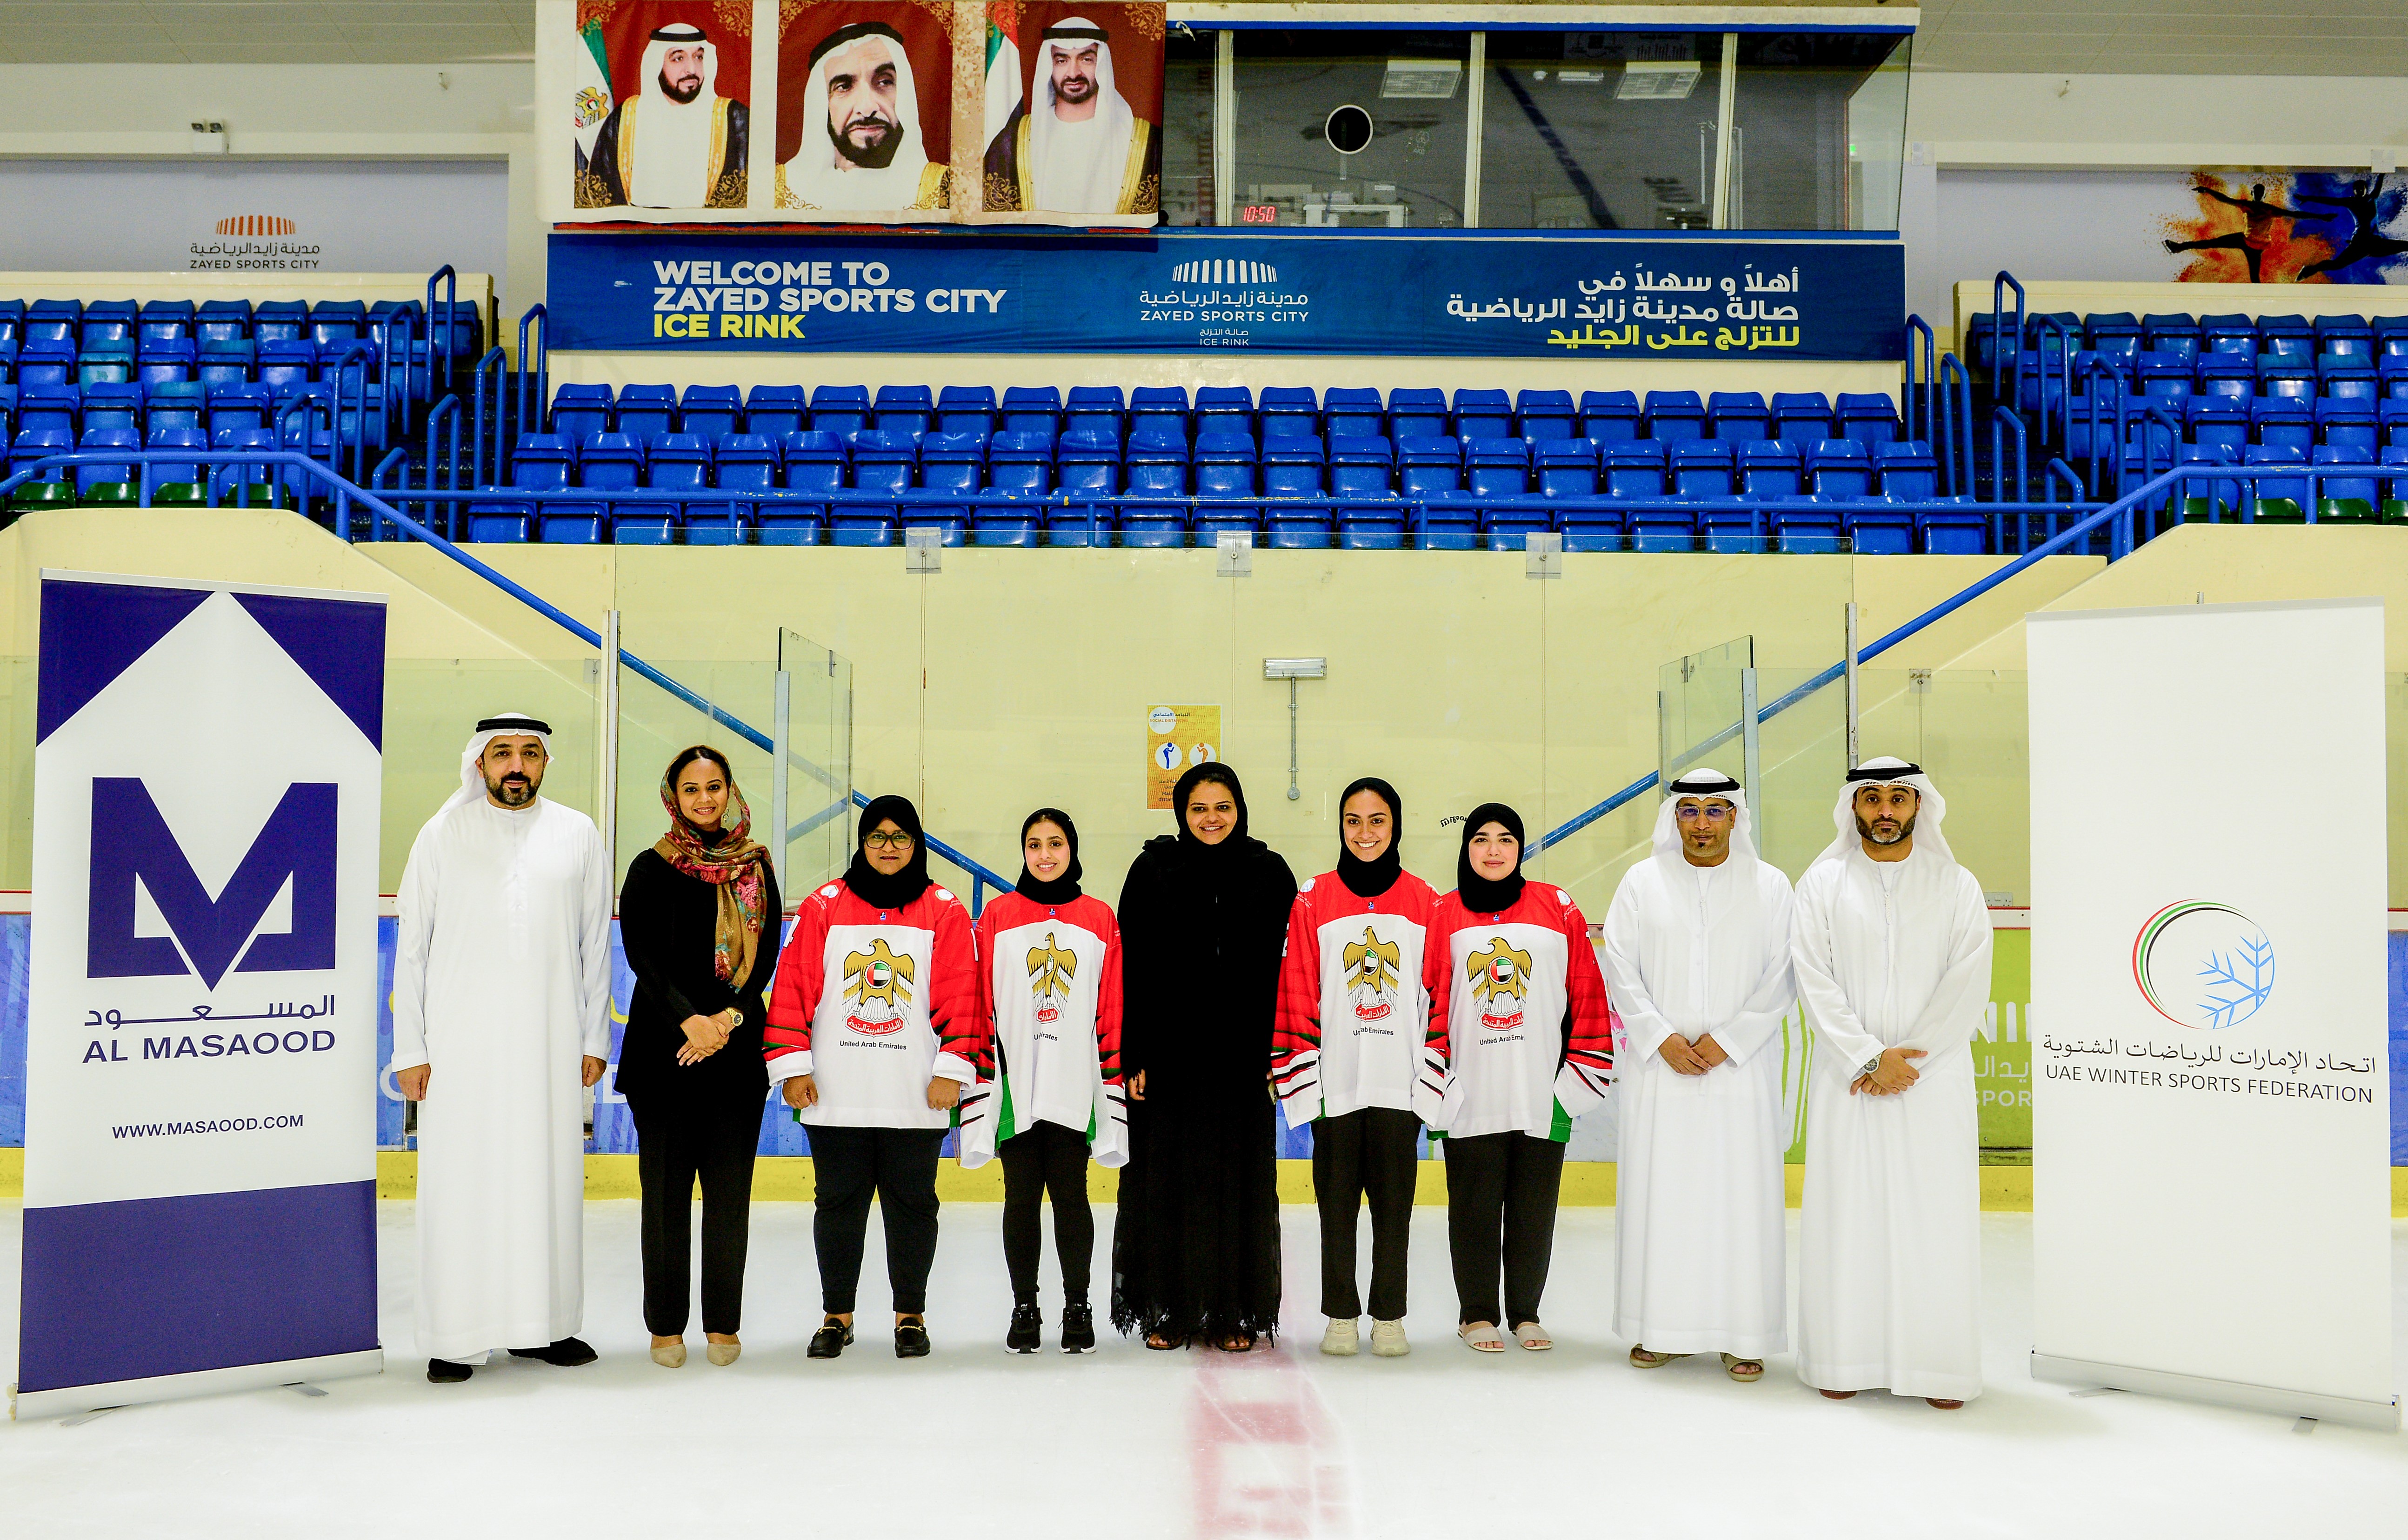 Al Masaood Joins Hands with the UAE Winter Sports Federation to Support National Women's Ice Hockey Team